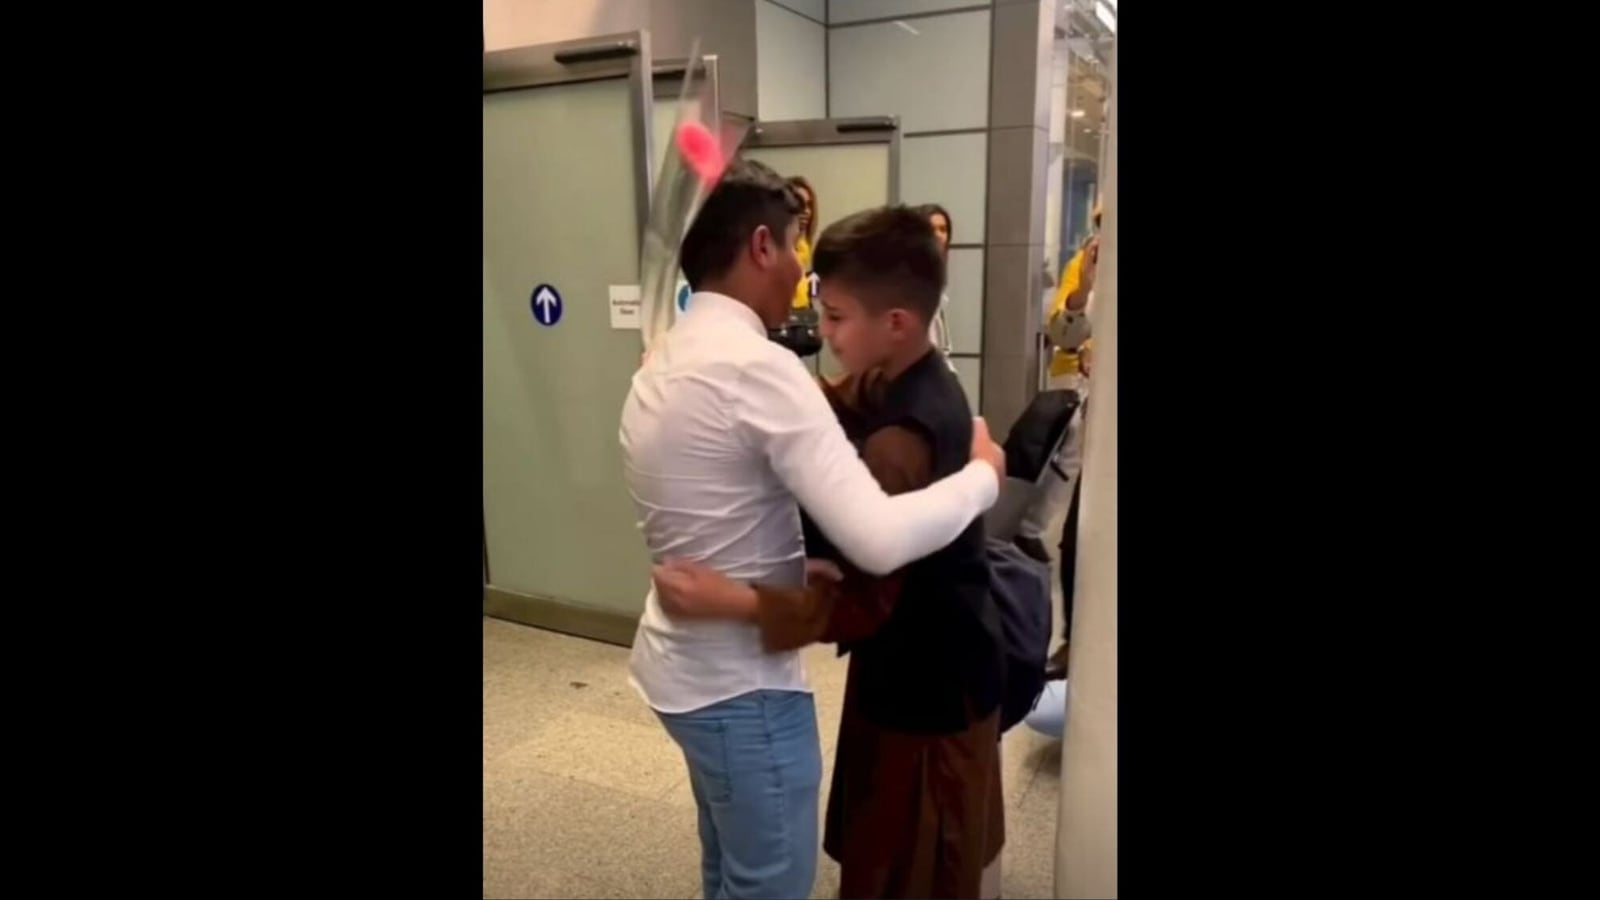 afghan-brothers-who-were-displaced-by-war-reunite-after-months-watch-heartwarming-video